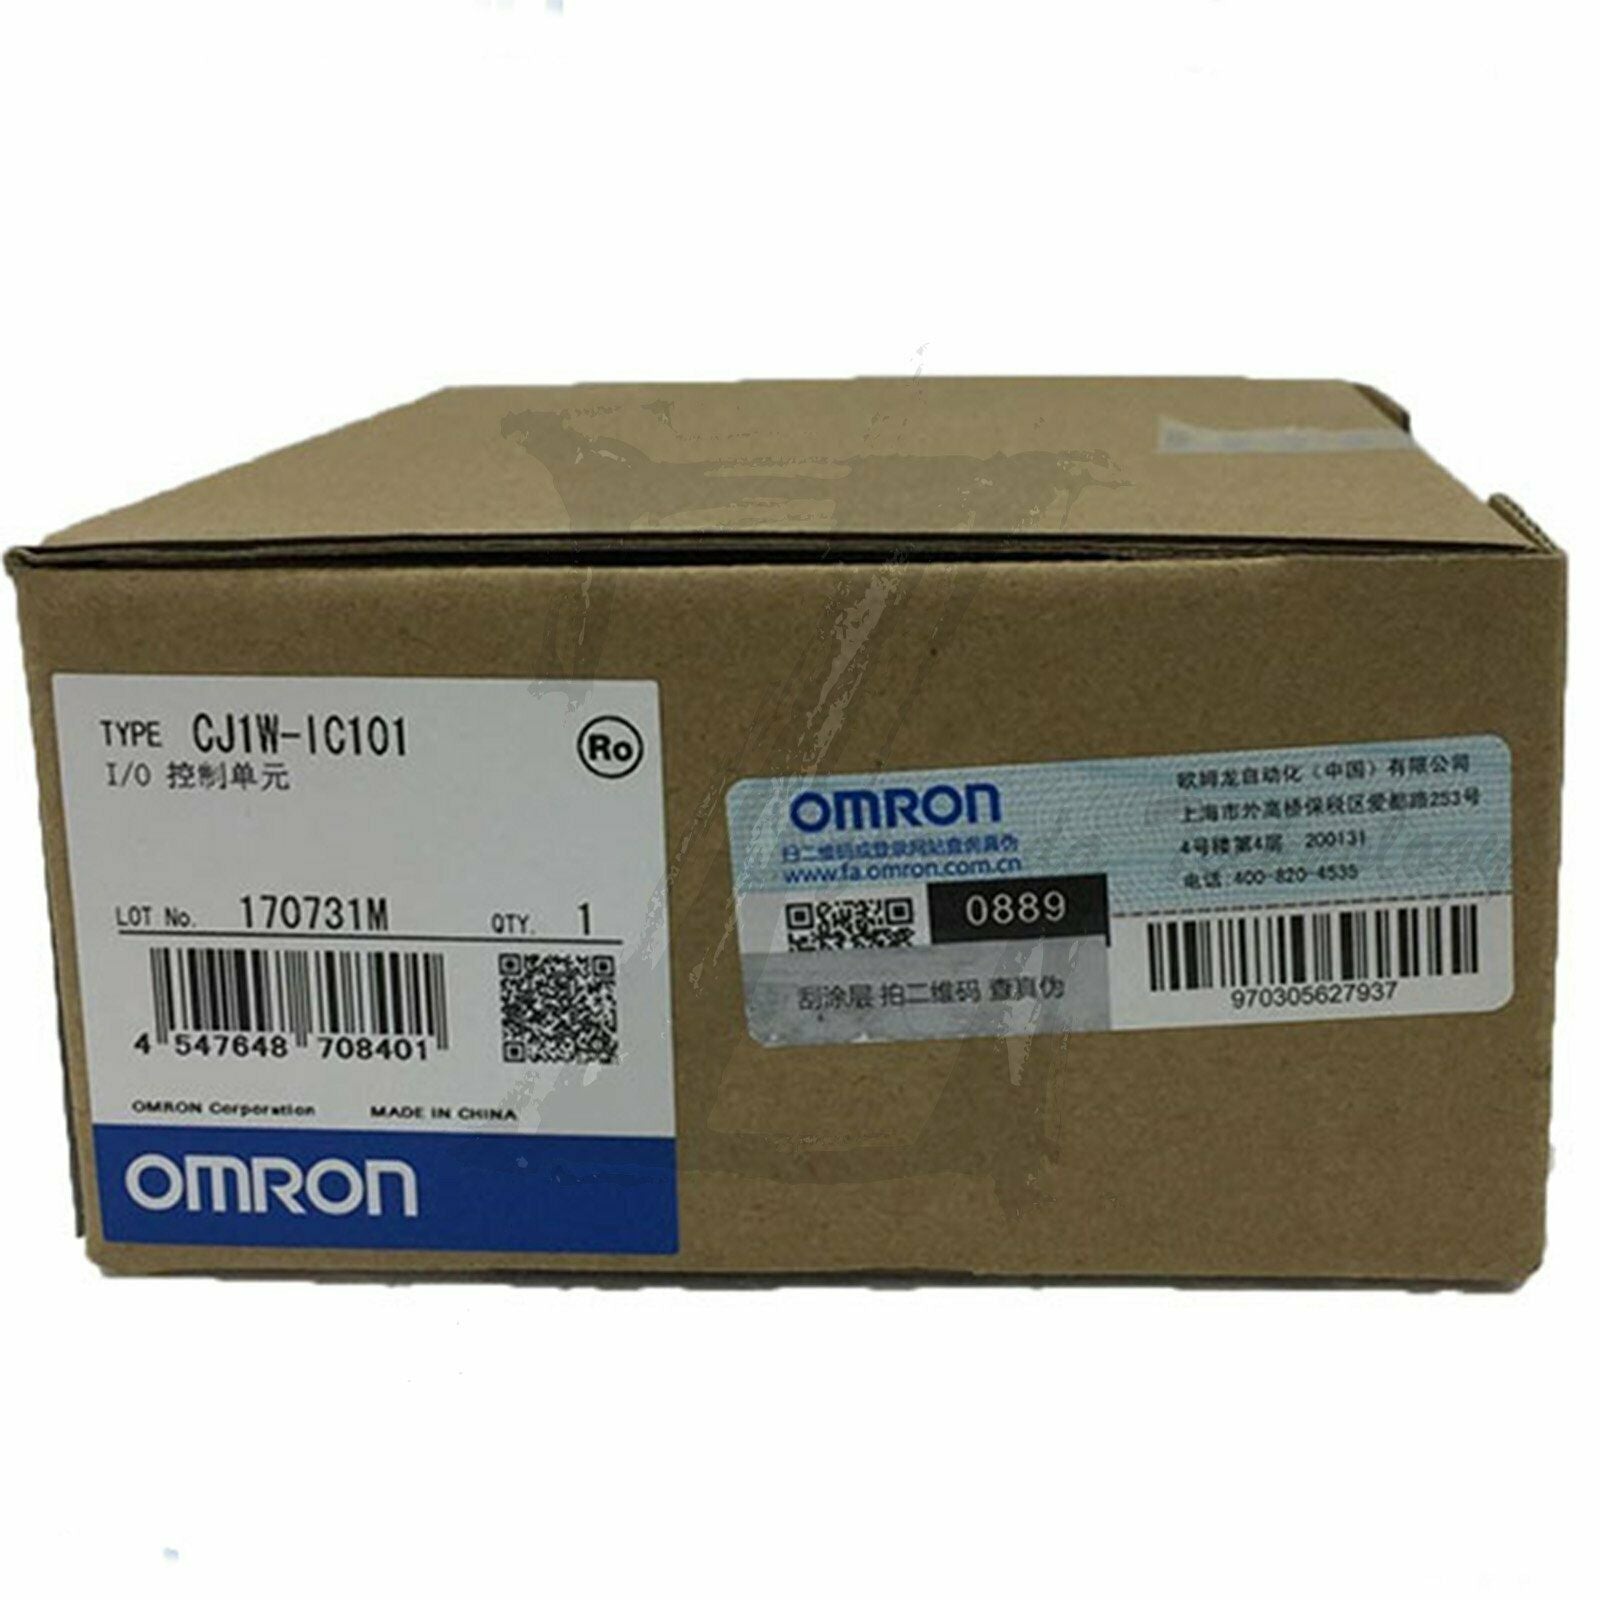 1pc new Omron CJ1W-IC101 module one year warranty KOEED 1, 80%, import_2020_10_10_031751, Omron, Other